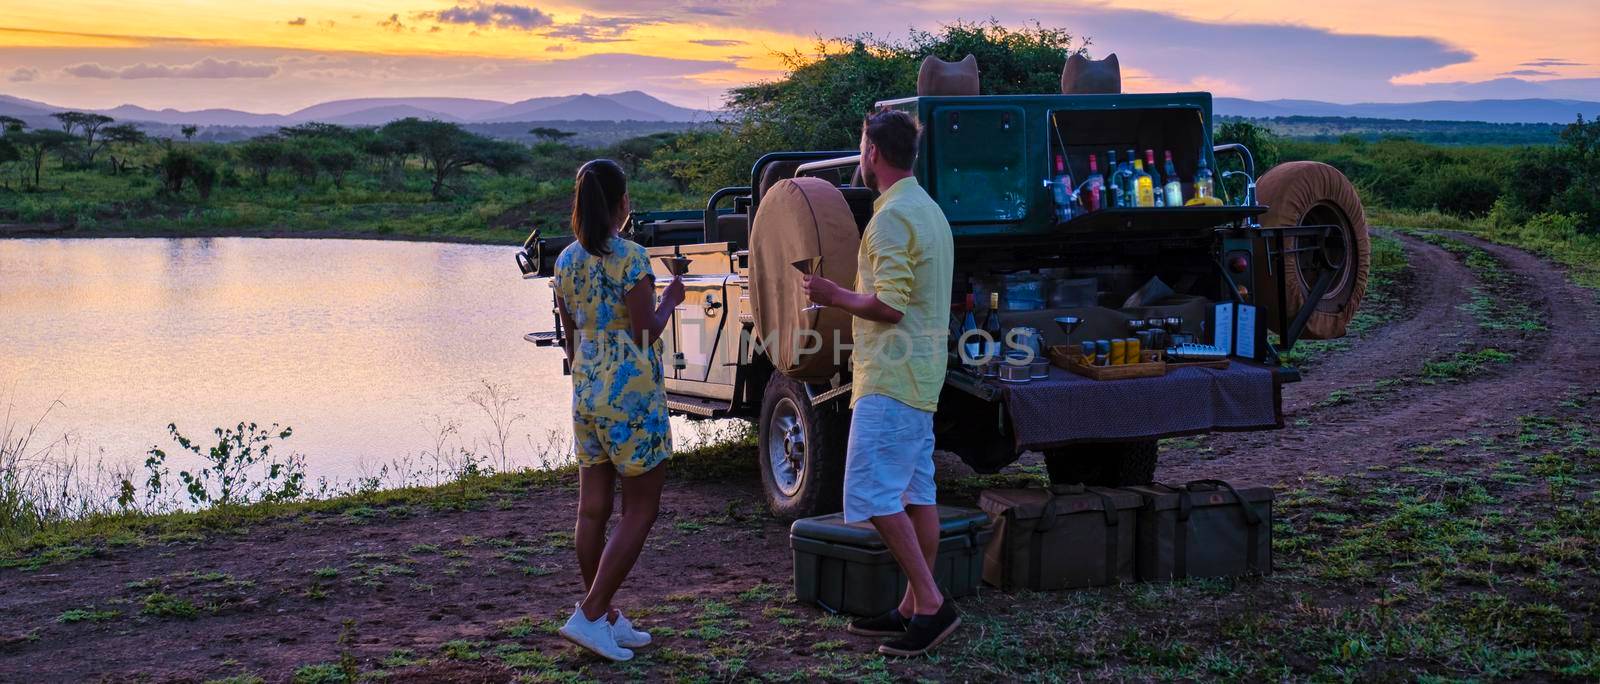 couple men and Asian woman on safari in South Africa, South Africa Kwazulu Natal, luxury safari car during a game drive, couple men and woman on safari in South Africa.